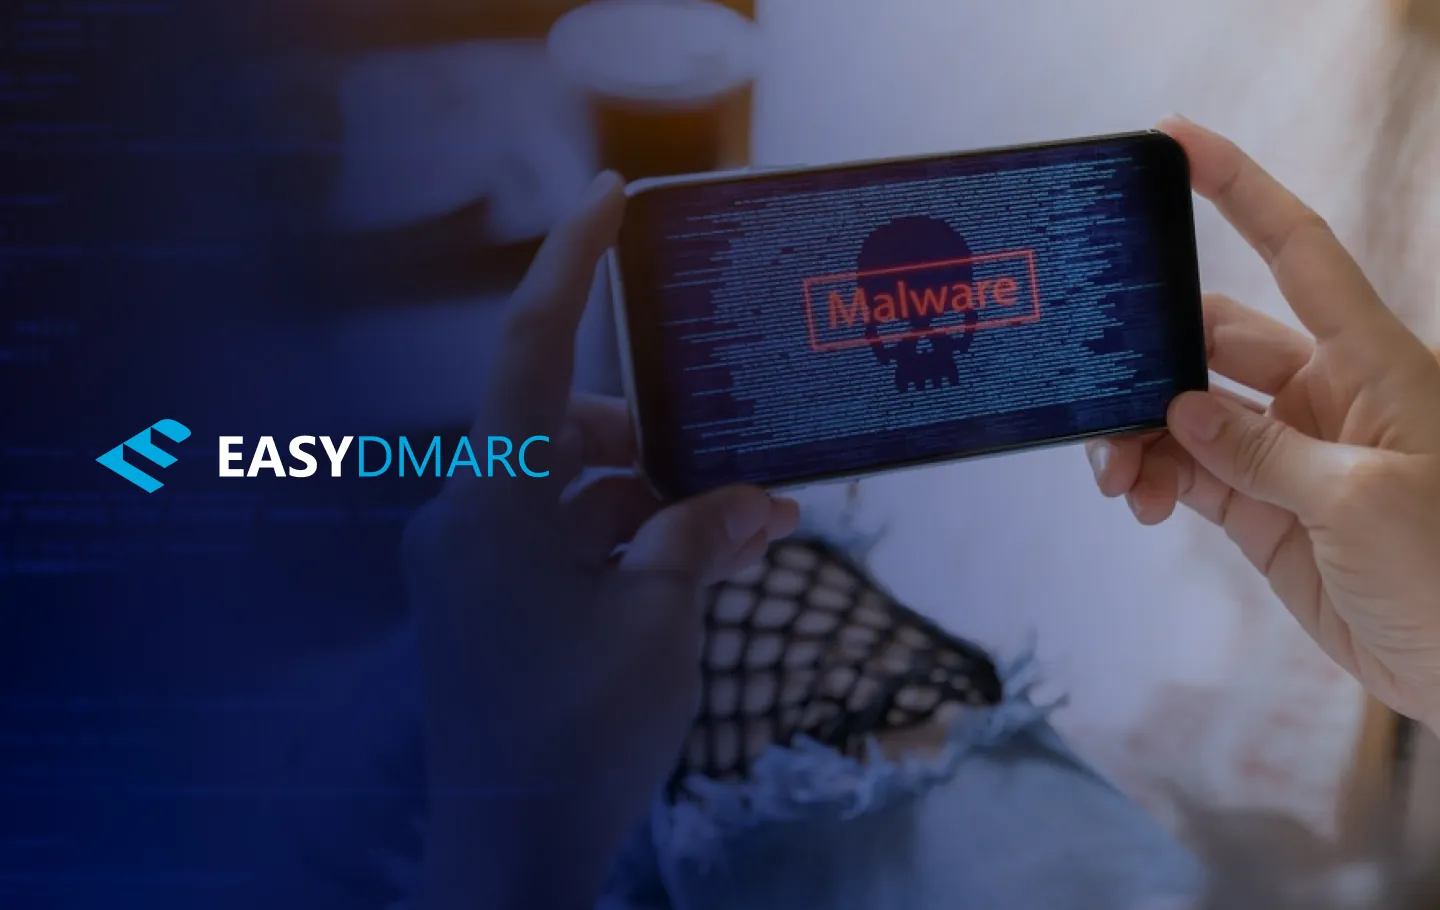 A person holding a phone by both hands, "Malware" writing on the phone screen and EasyDMARC logo on the left side